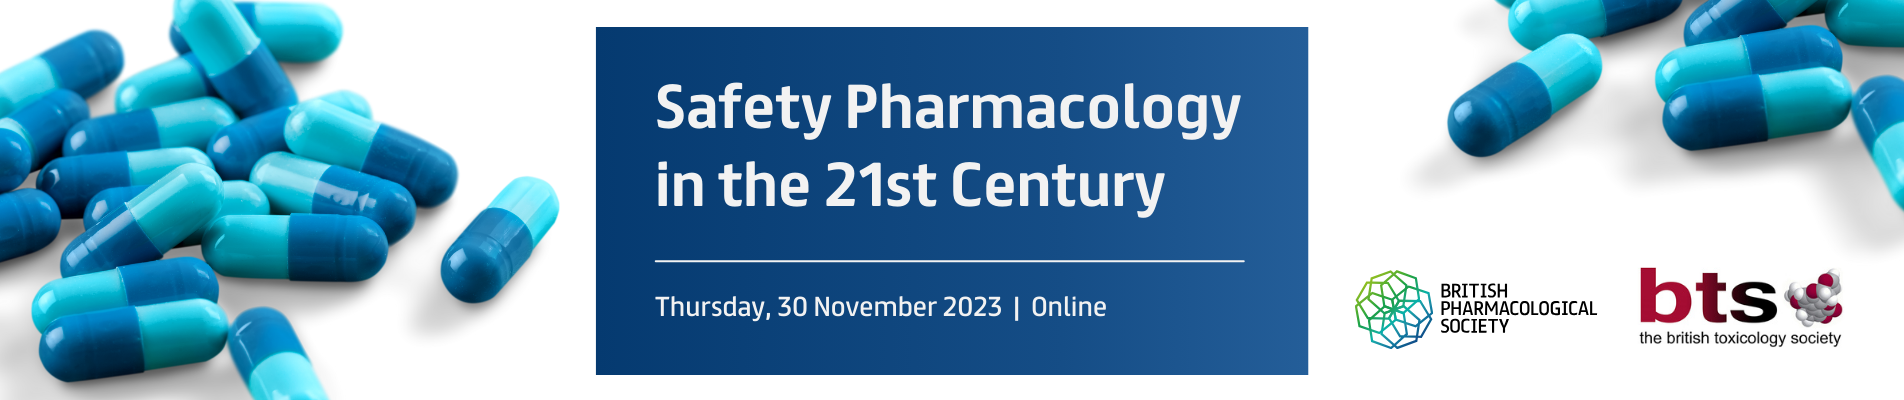 Safety Toxicology in the 21st Century